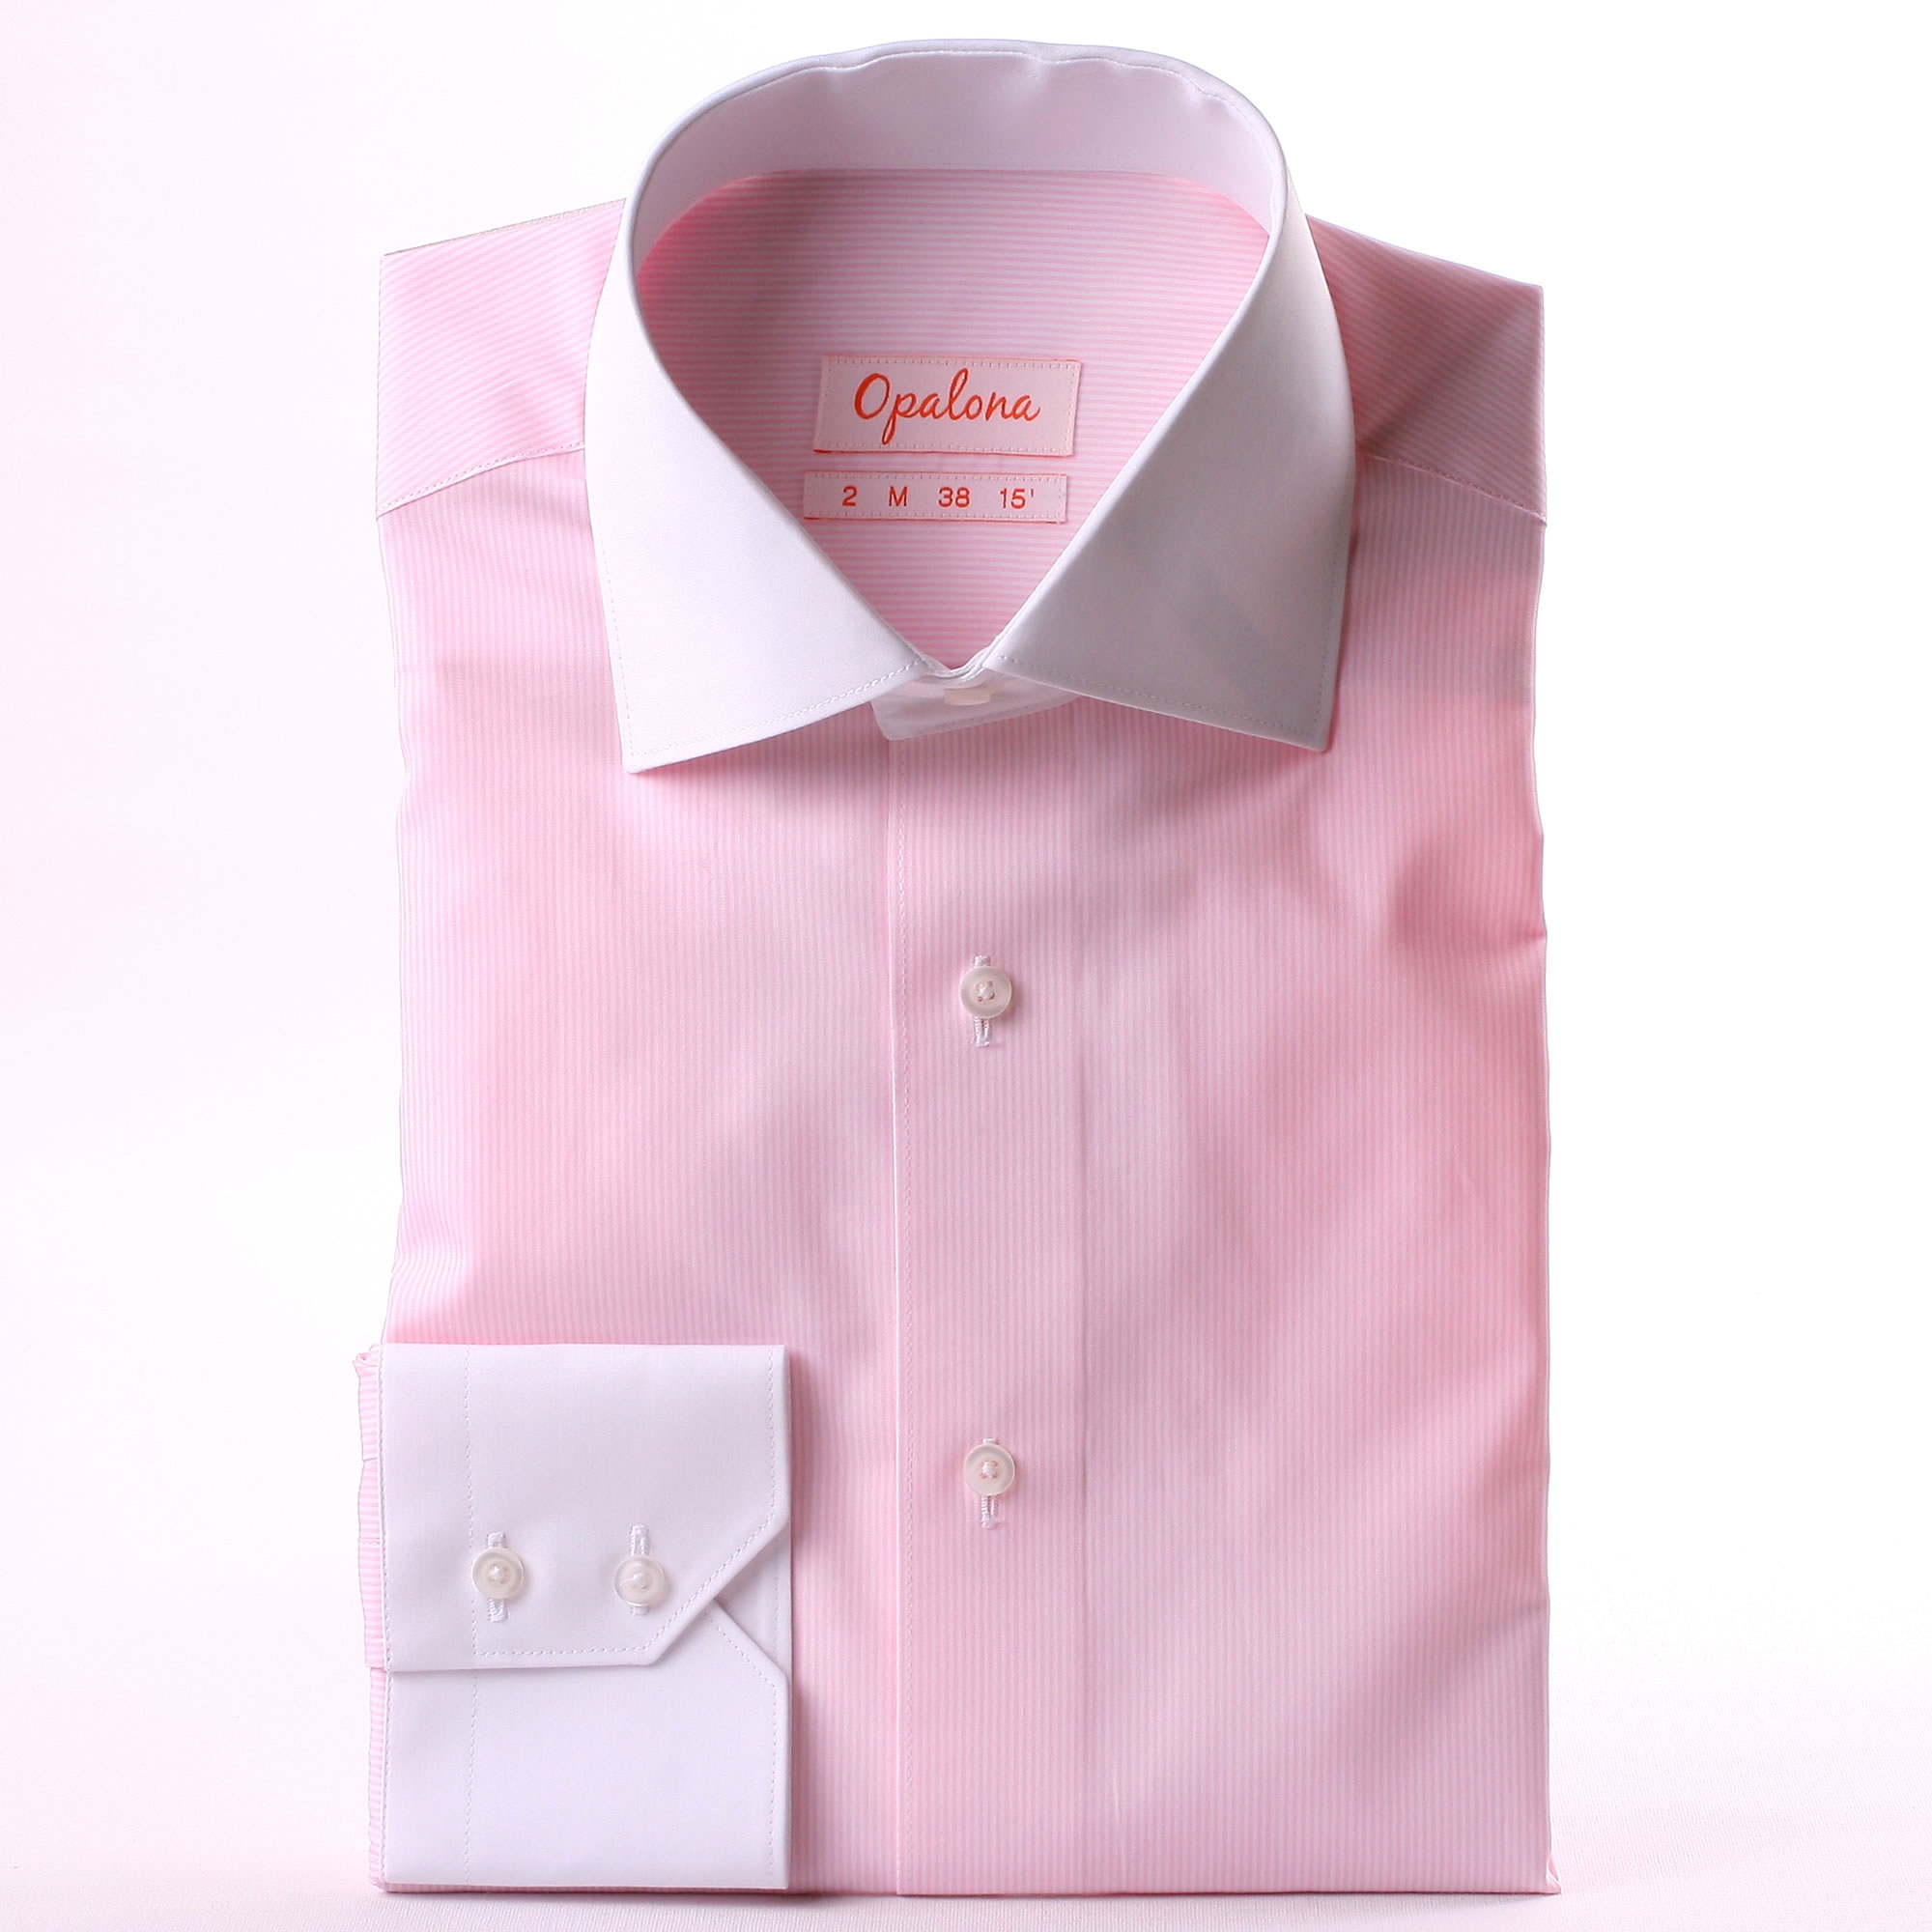 Pink and white striped shirt with white collar and cuffs